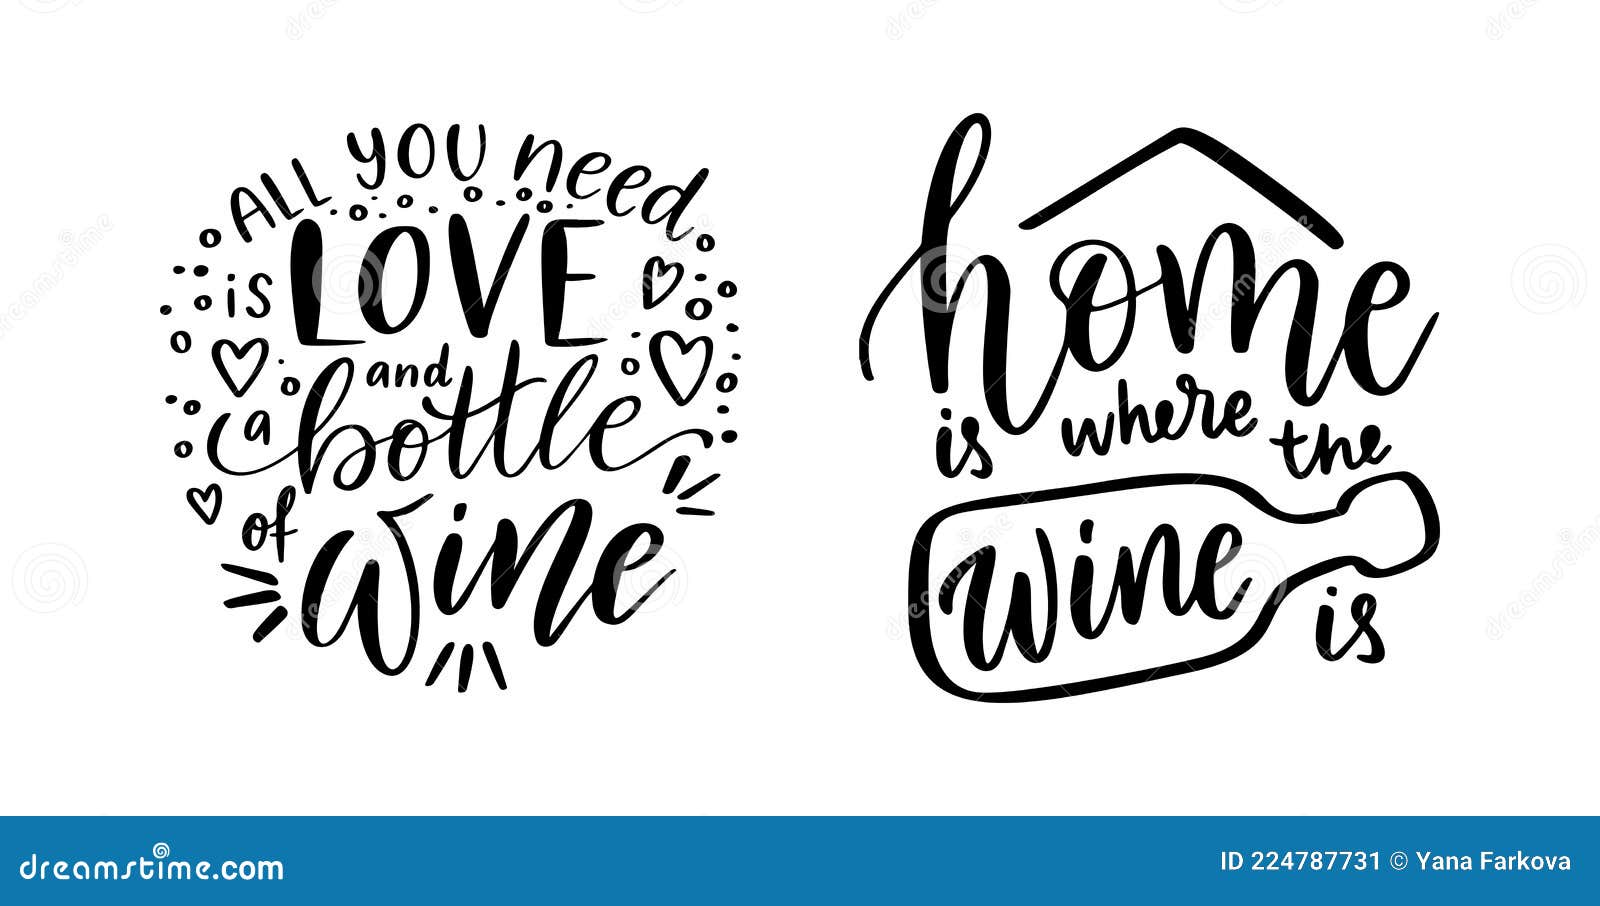 Positive Funny Wine Sayings Set for Poster in Cafe and Bar, T Shirt Design.  Home, Wine and Love - Vector Quotes Stock Vector - Illustration of  inspirational, font: 224787731